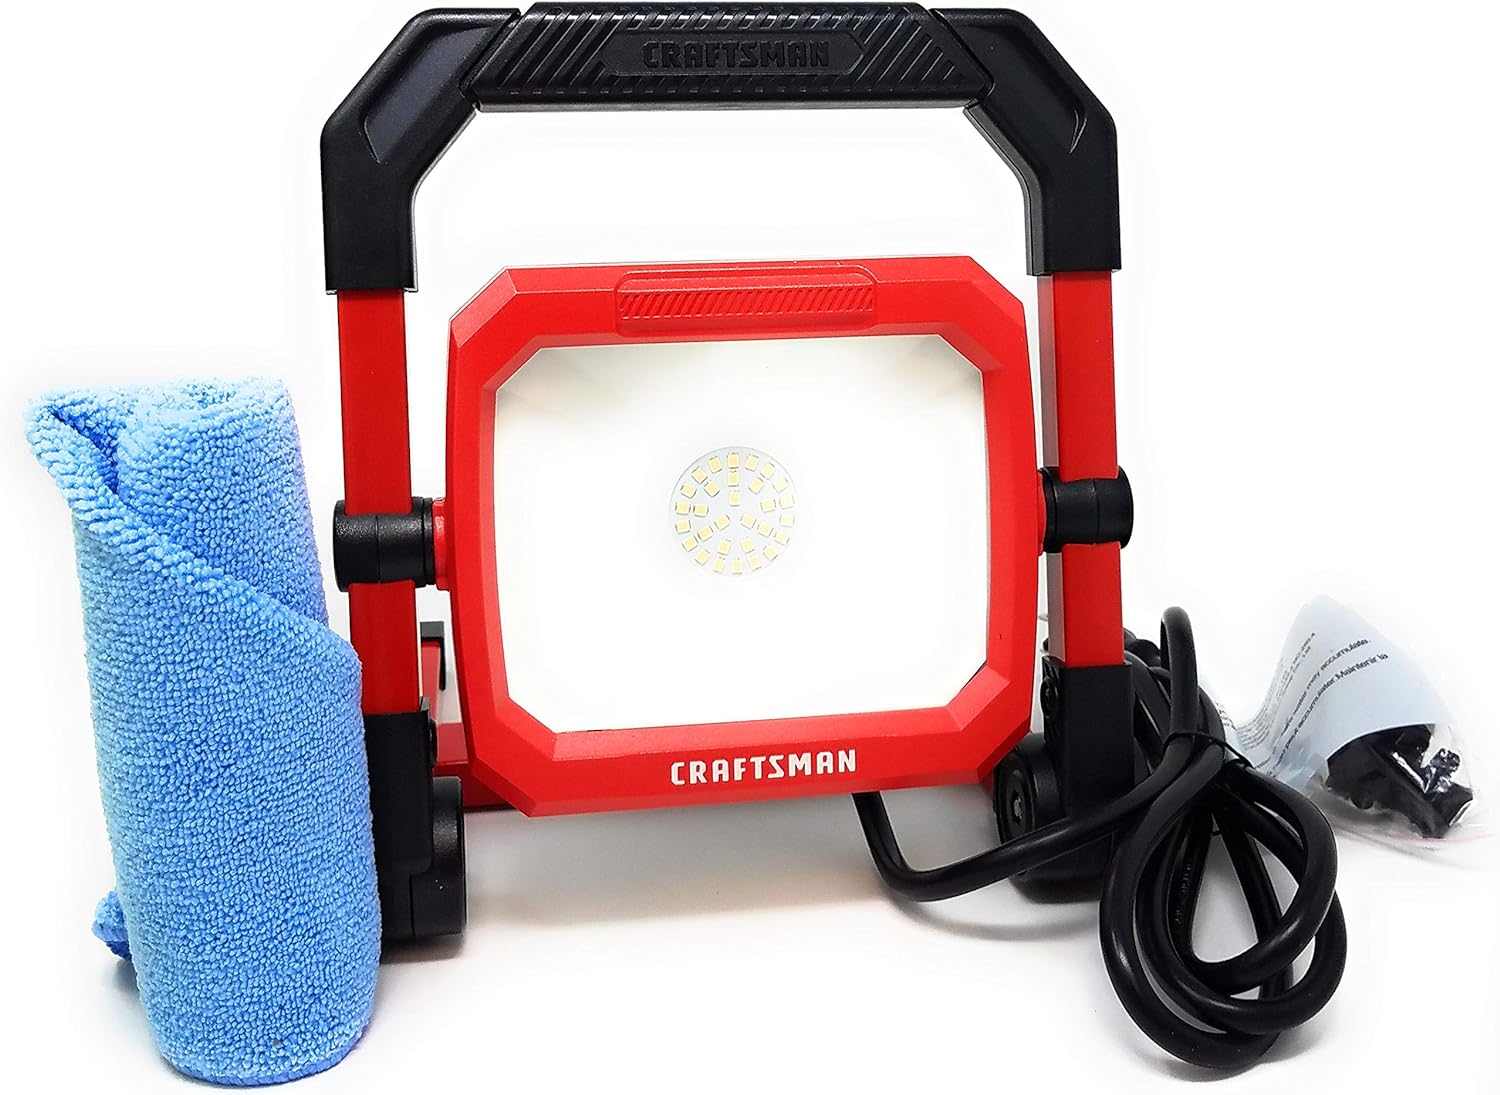 A red Craftsman LED light with a black handle and plug next to a blue microfiber towel.